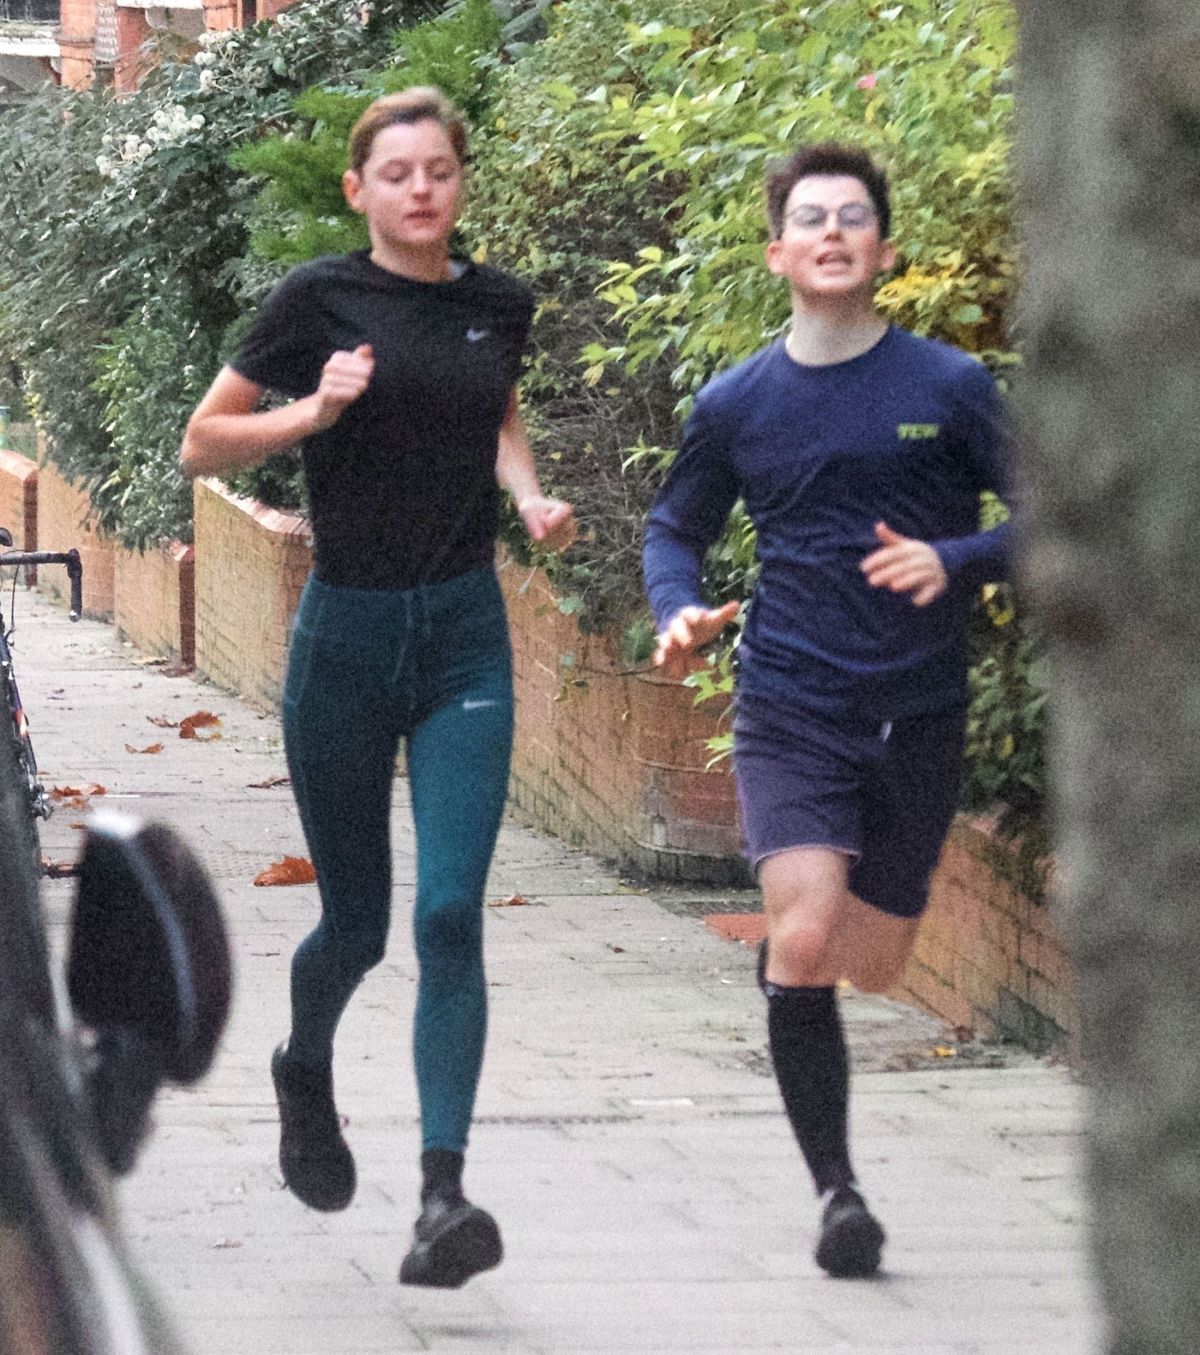 emma-corrin-out-jogging-with-a-friend-in-london-11-16-2020-3.jpg